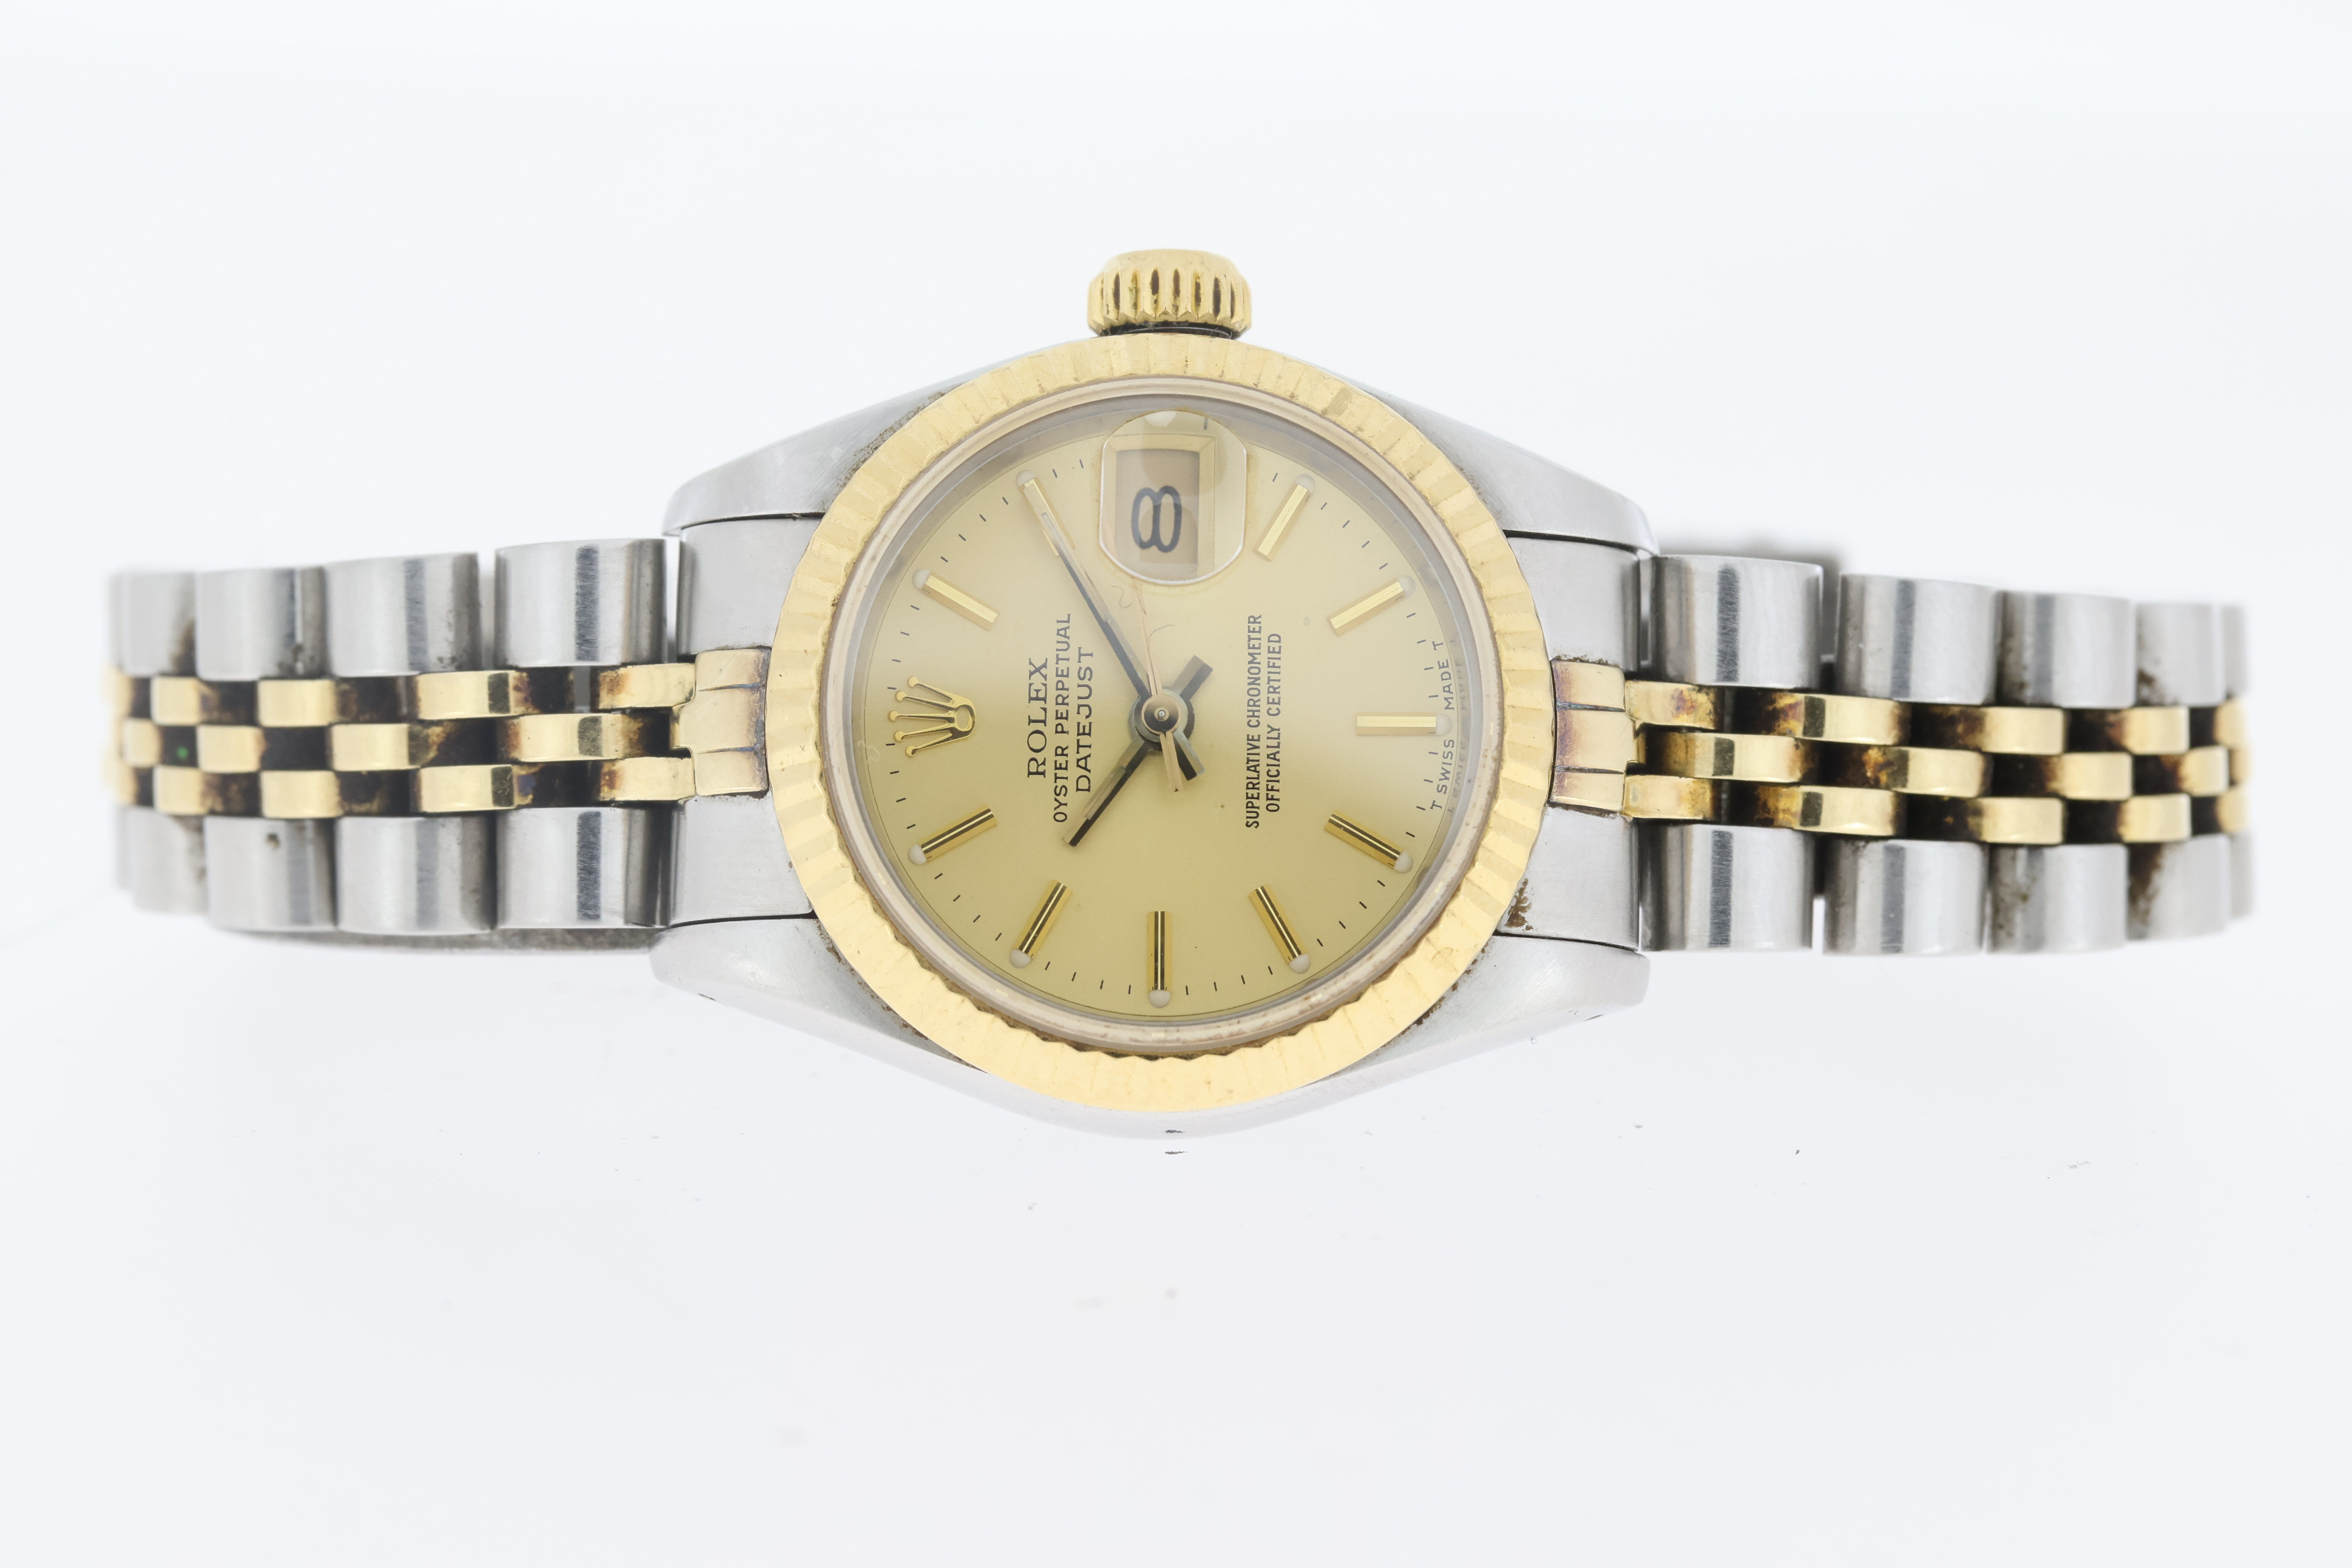 Ladies Rolex Datejust 26 Reference 69173 Box and Papers 1988 - Image 2 of 6